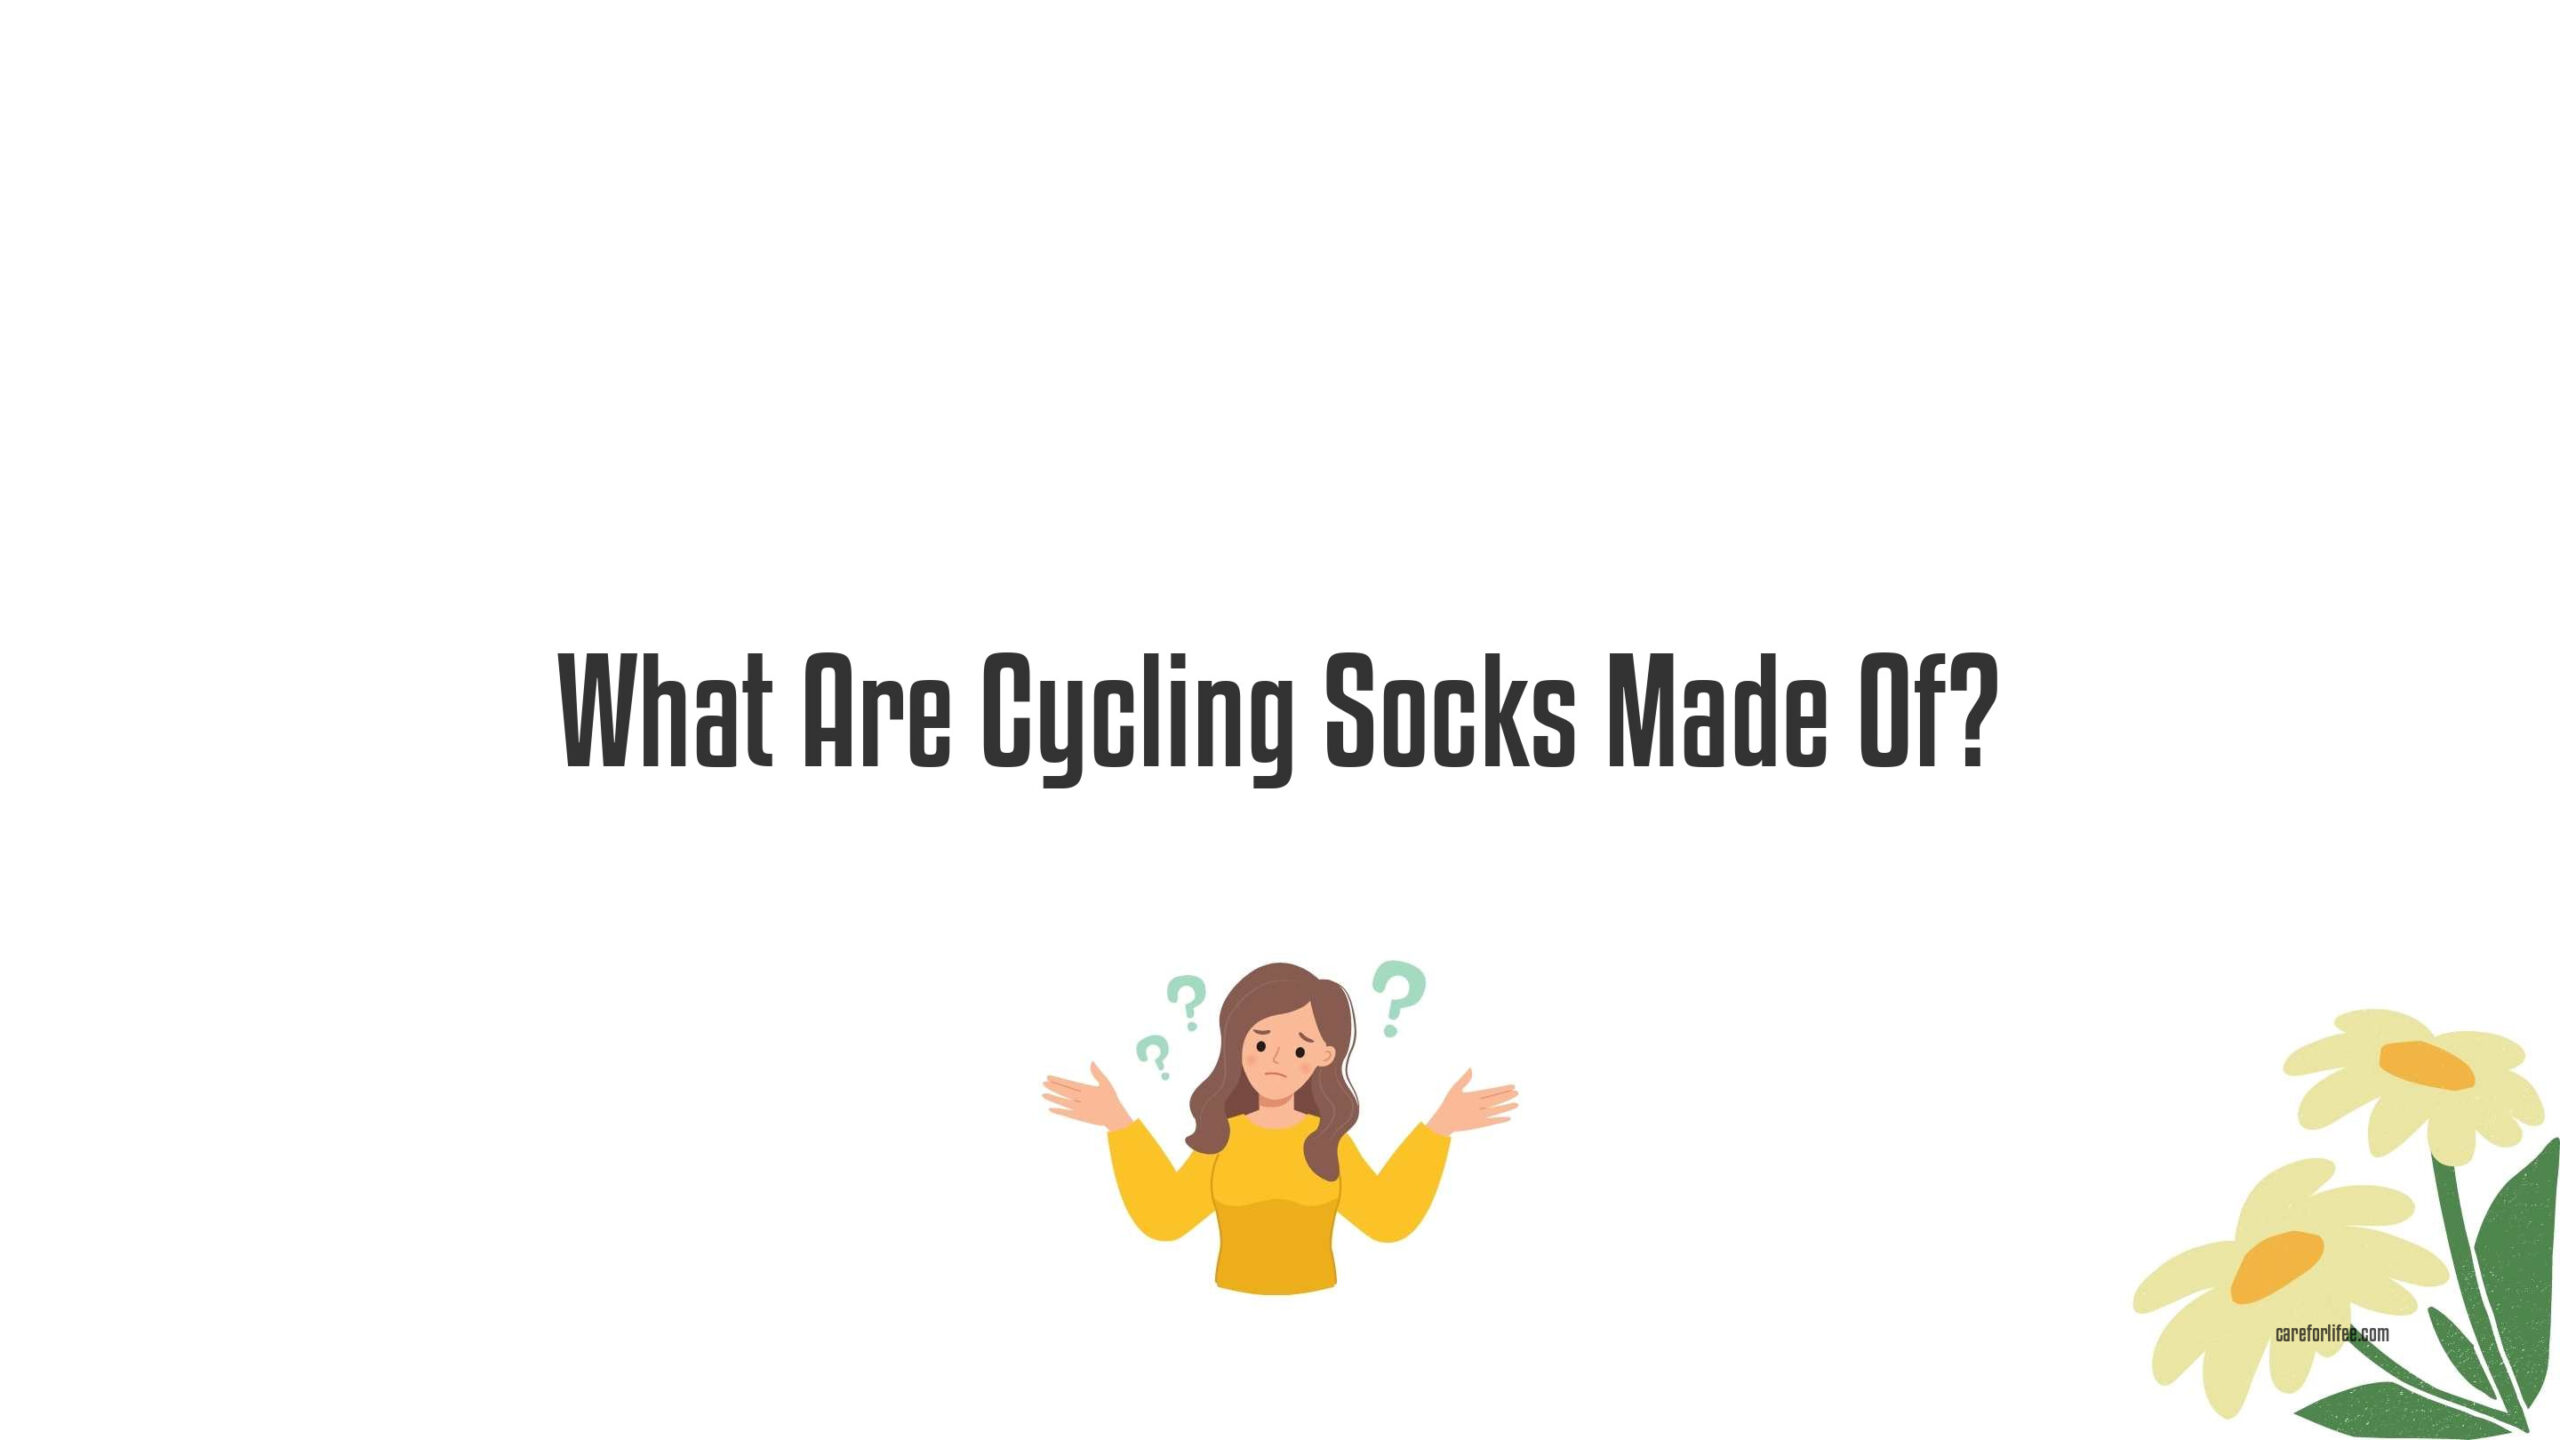 What Are Cycling Socks Made Of?